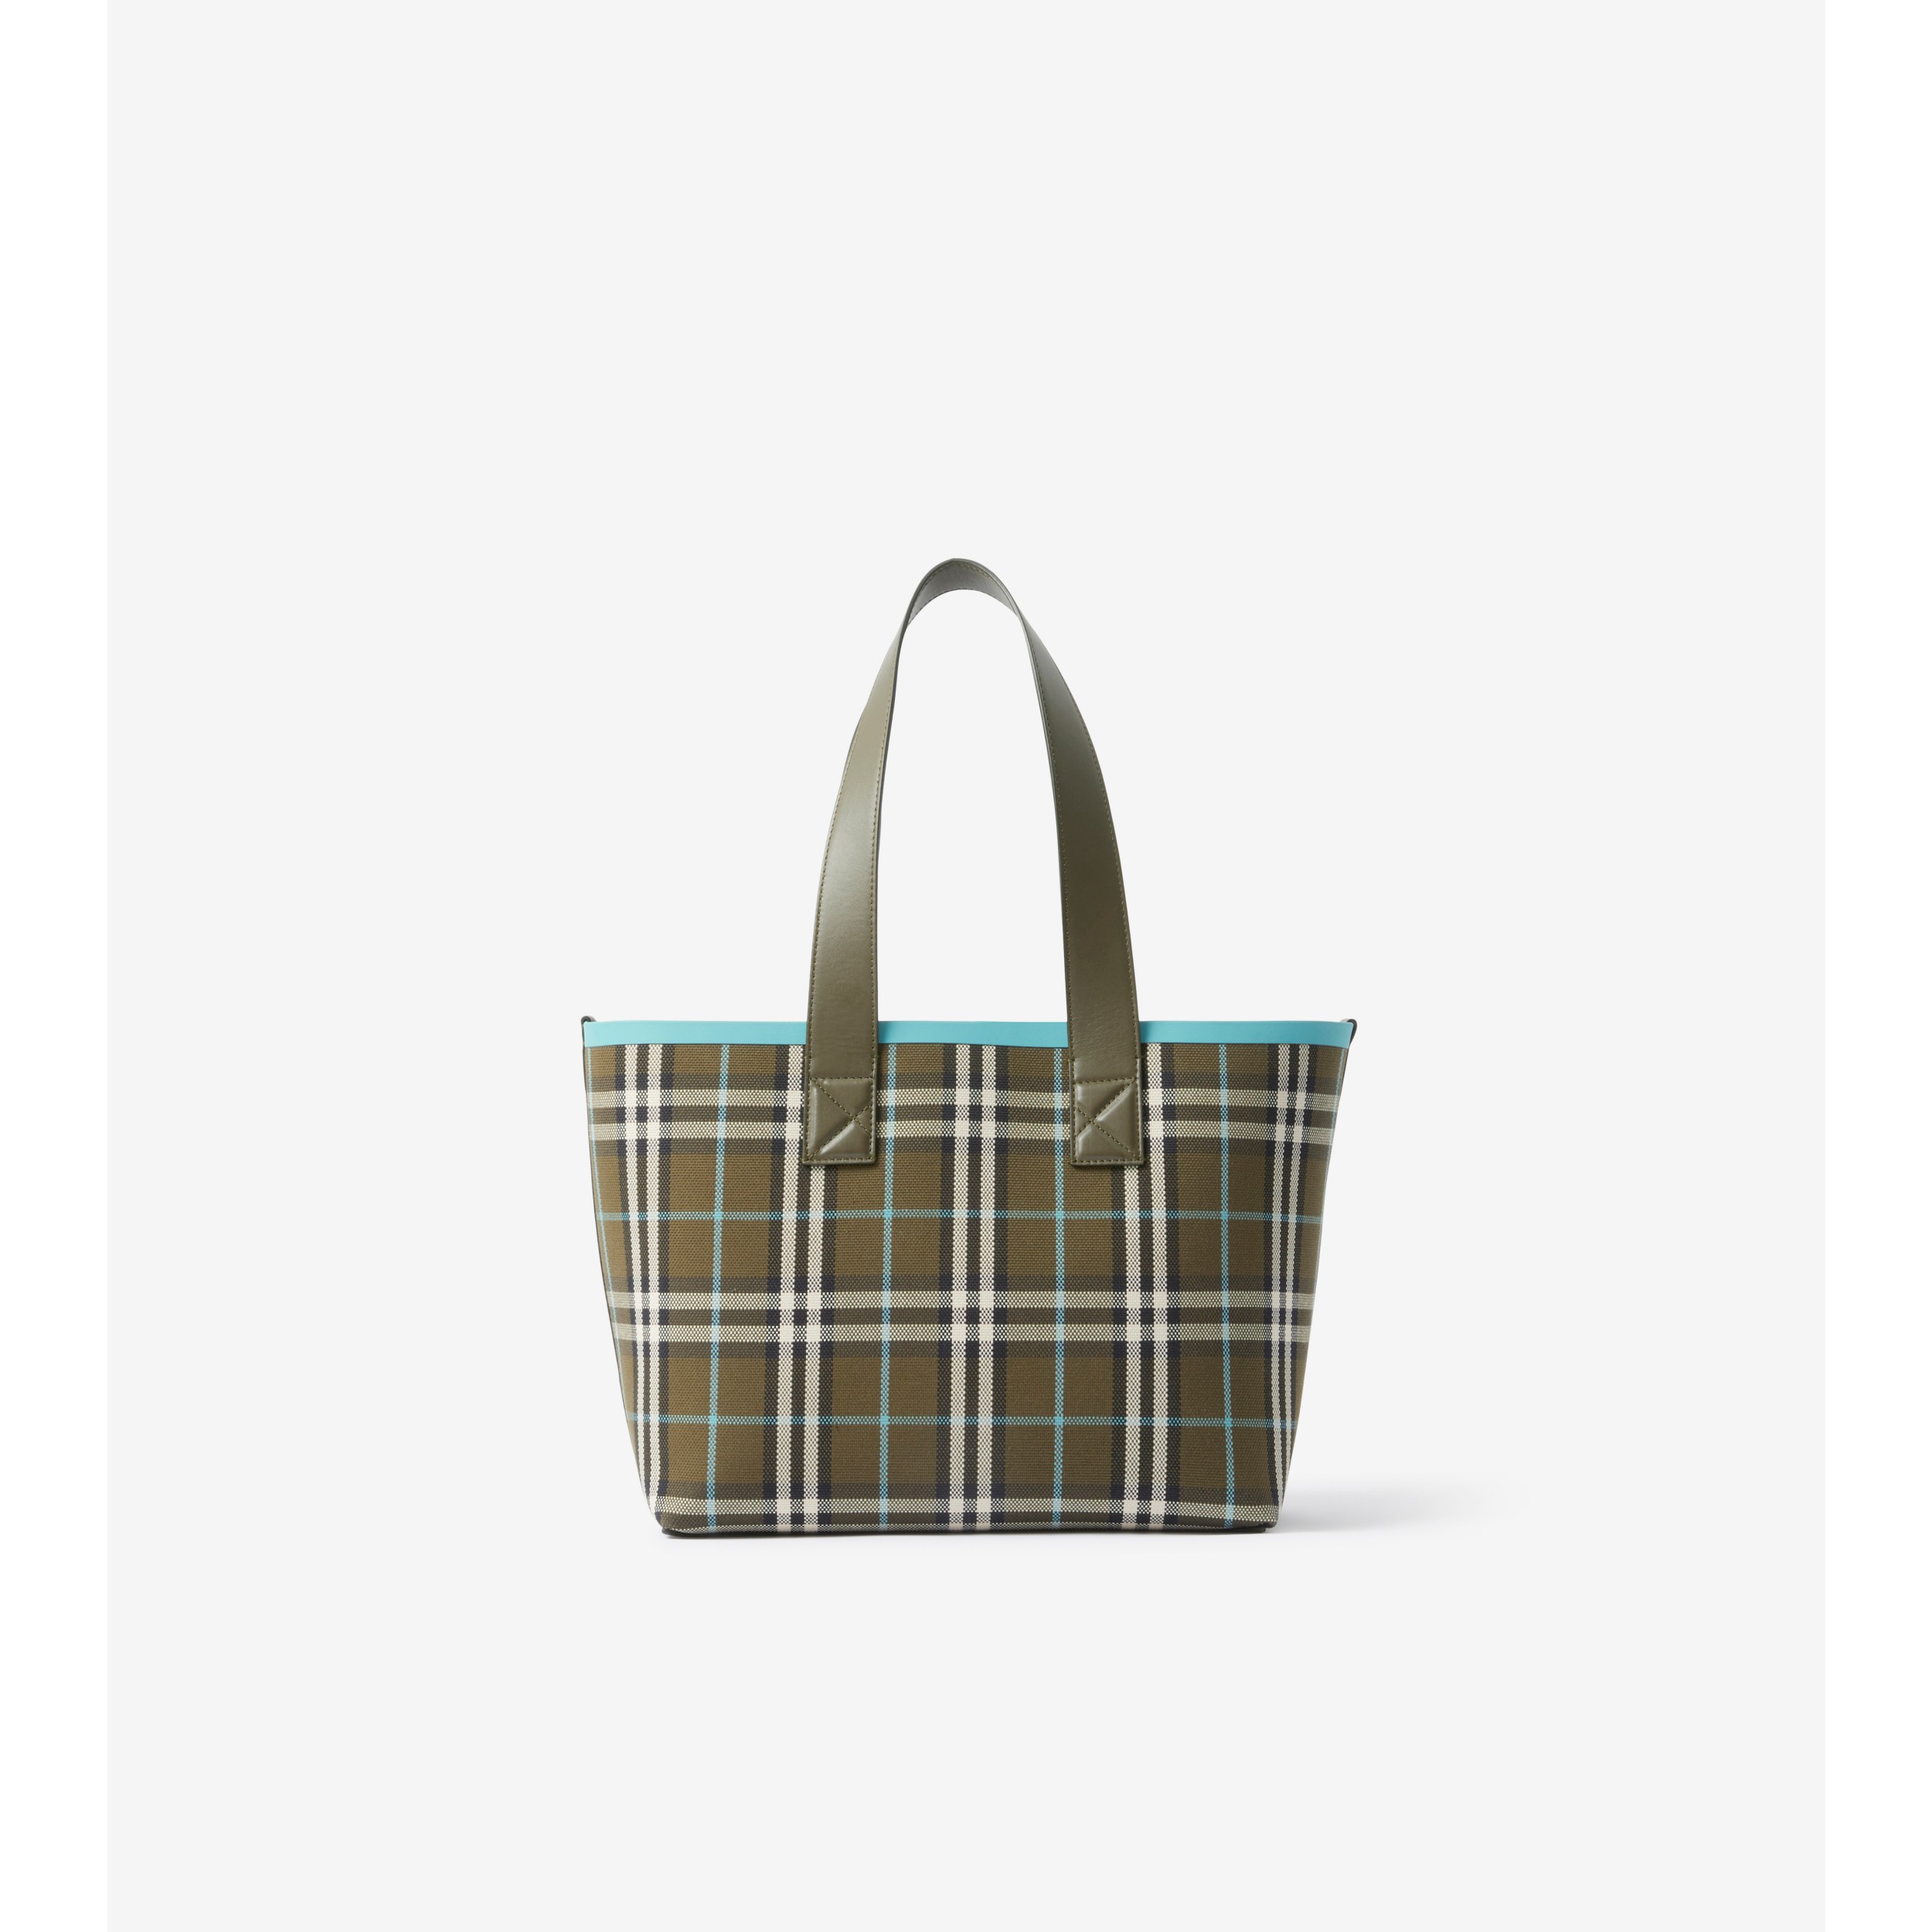 Burberry Purse Tote Bags